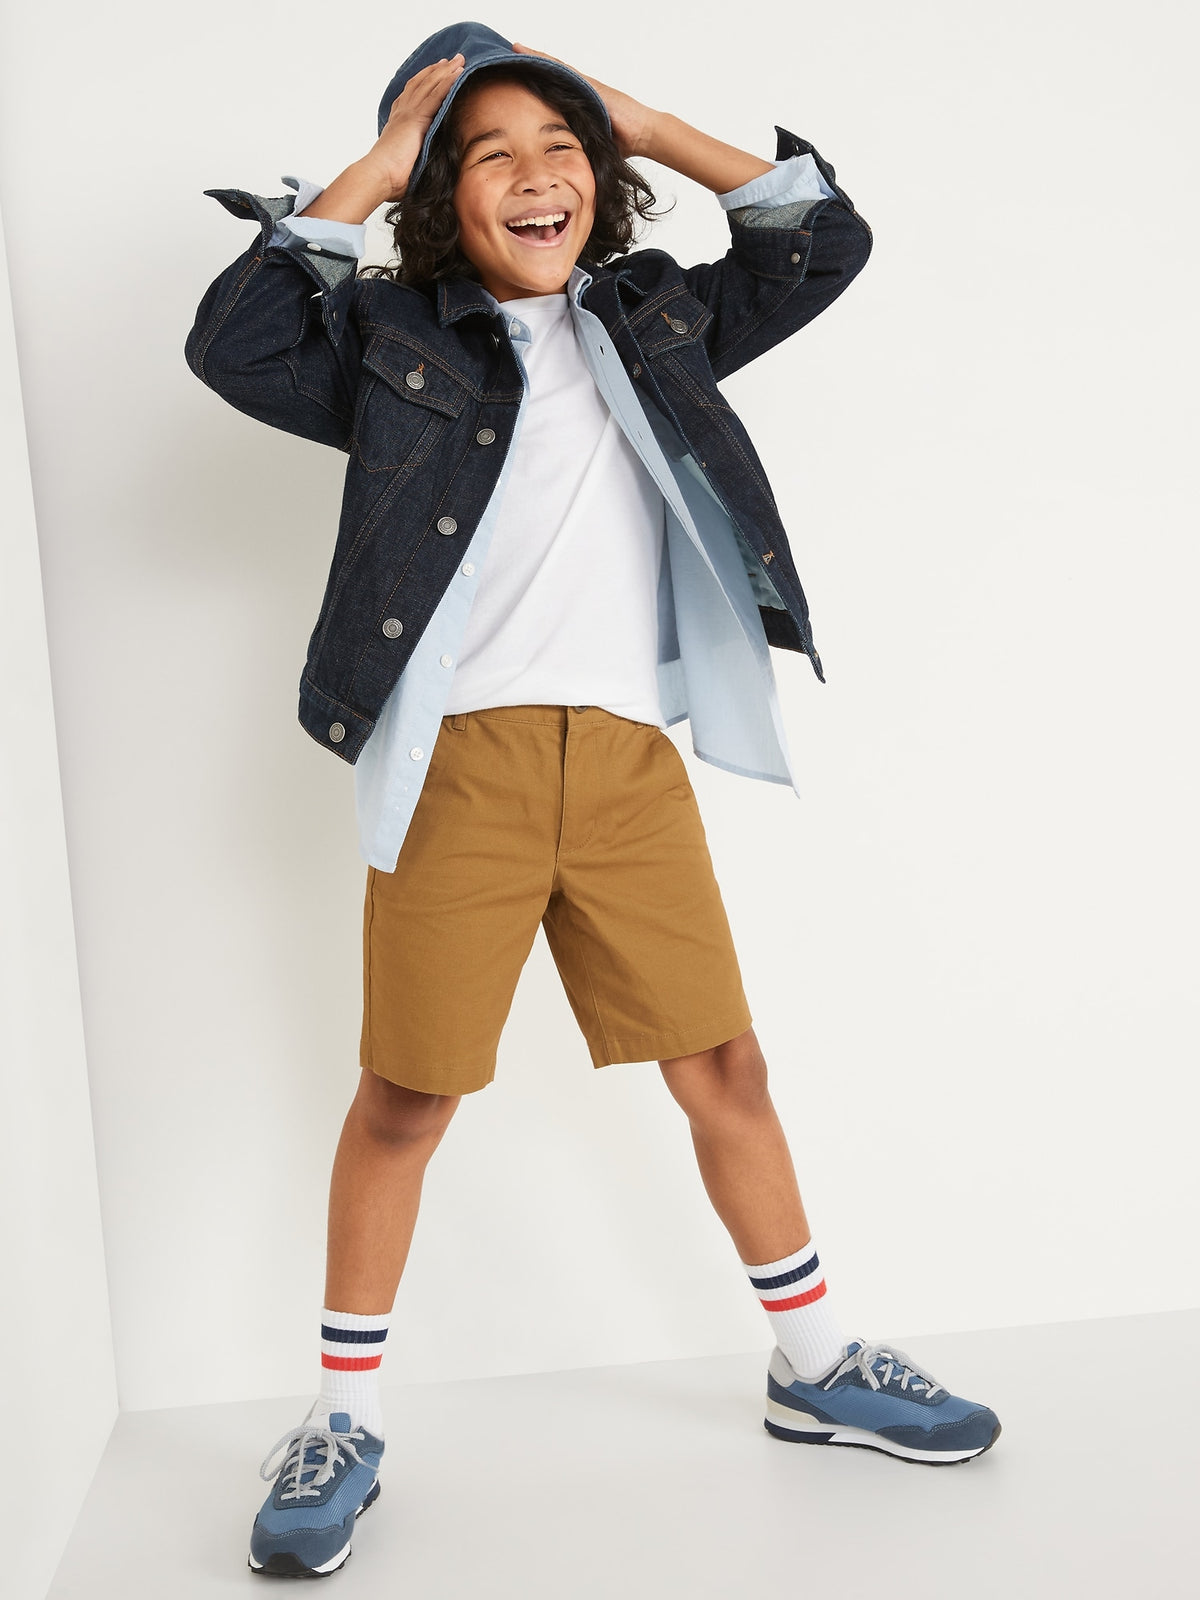 Twill Shorts for Boys (At Knee)